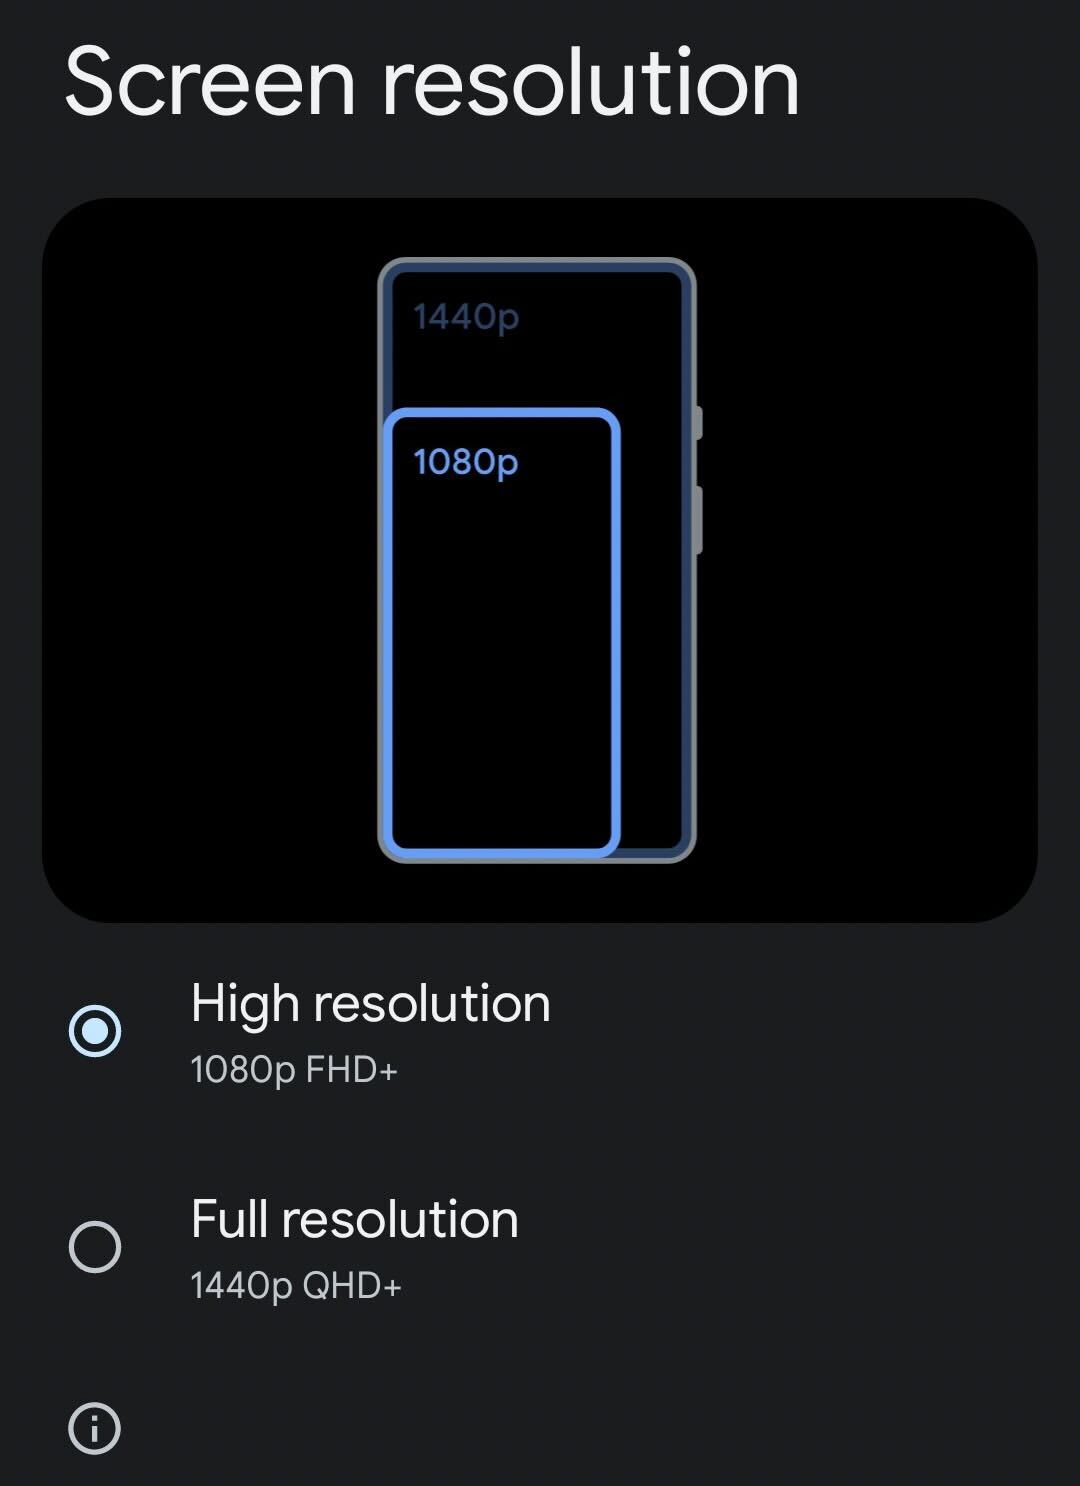 Resolution choices on Pixel